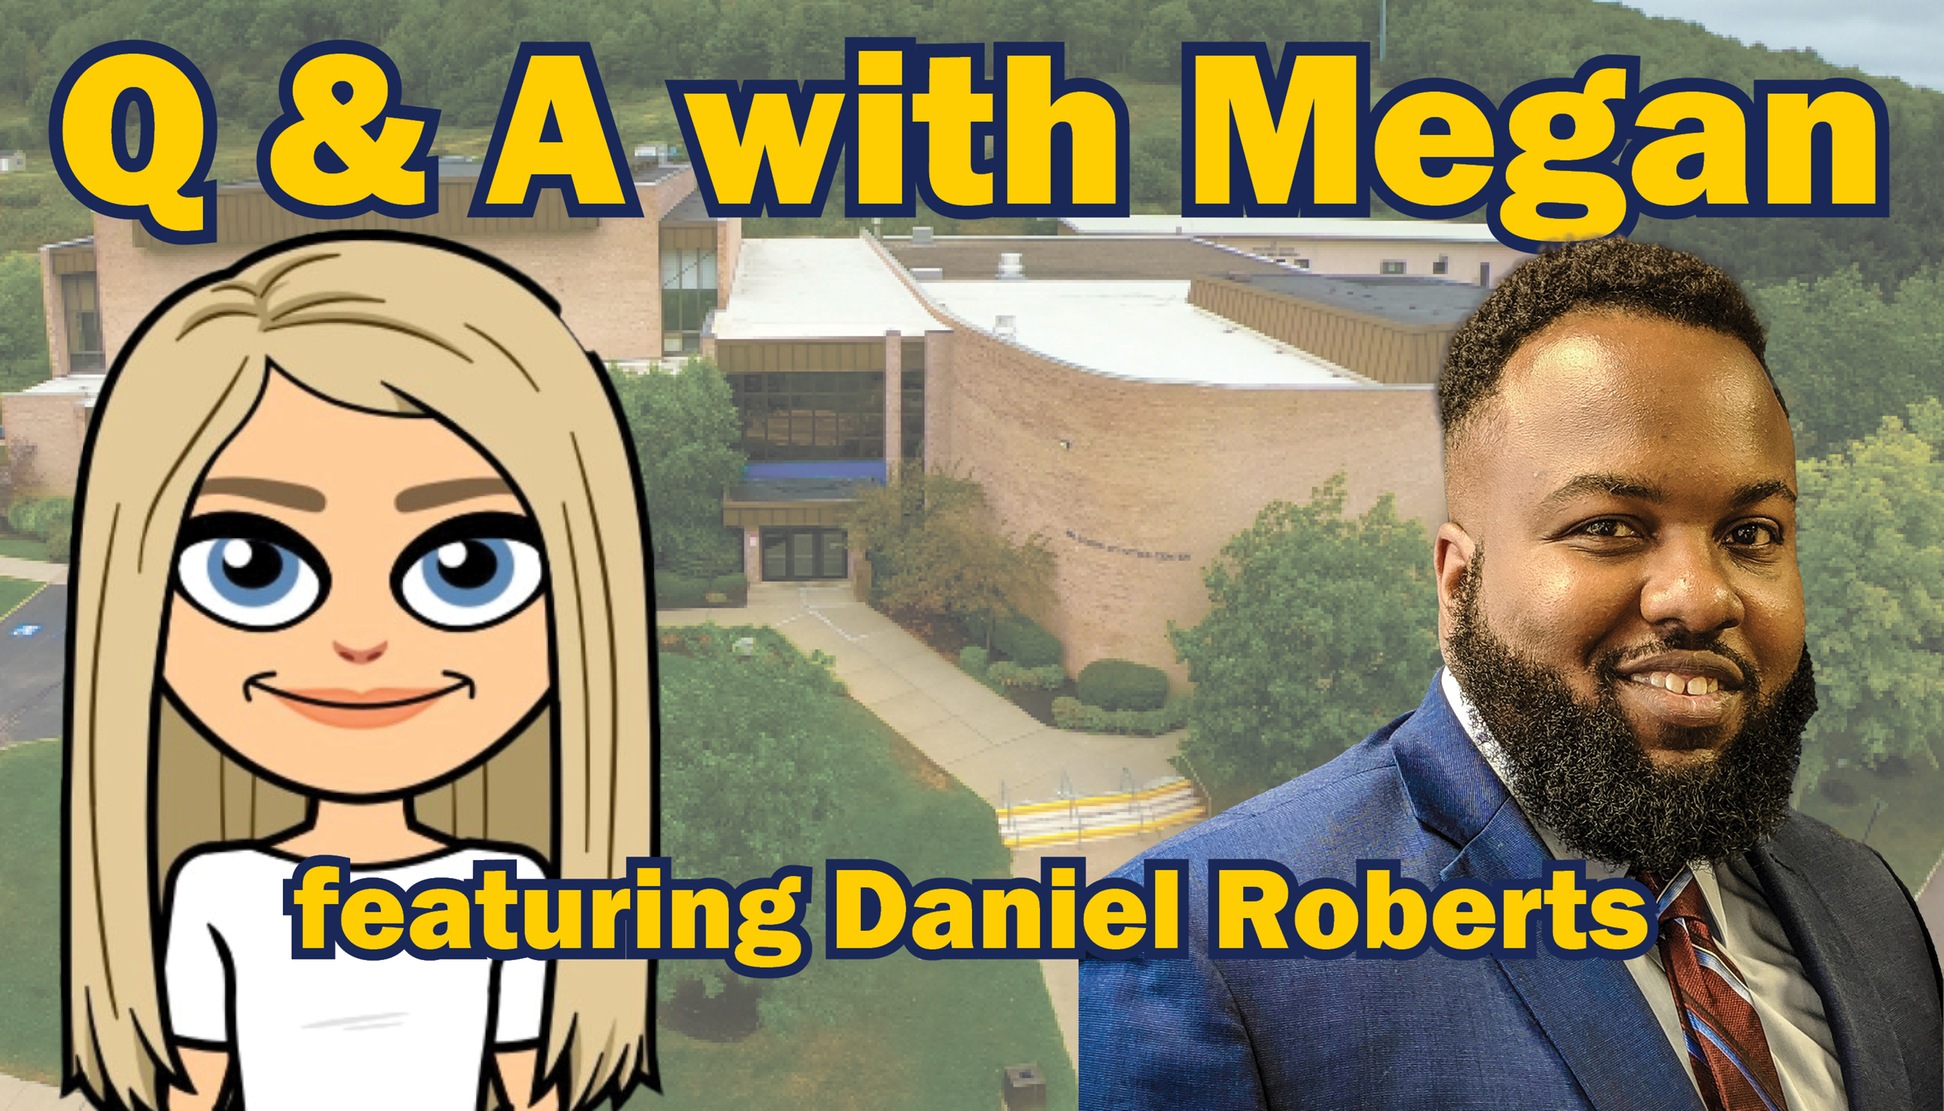 Q & A with Megan featuring Daniel Roberts - coordinator of event management and equipment services